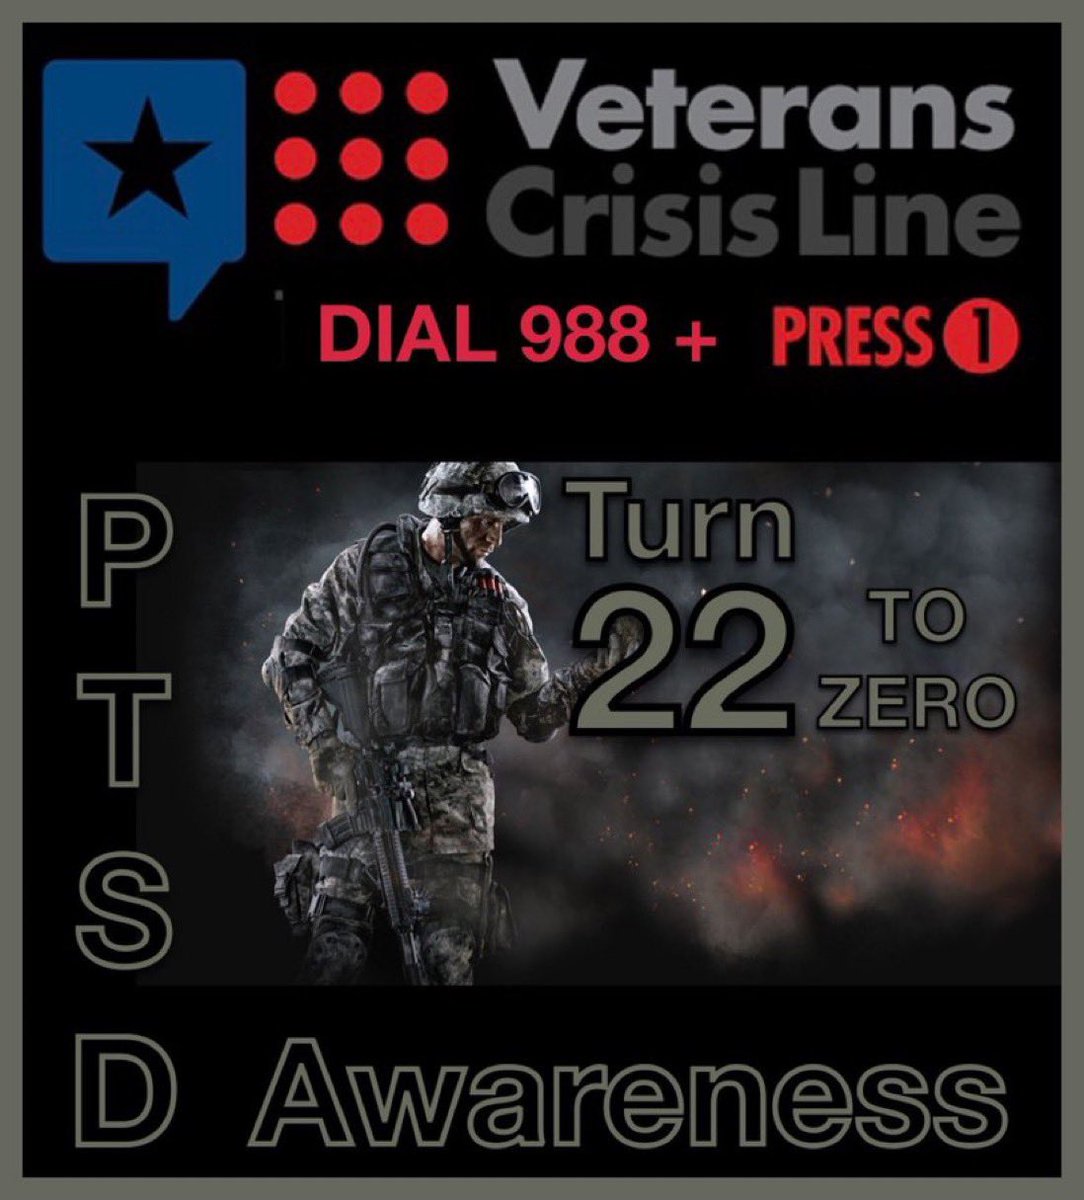 Good morning Patriots! 🇺🇸🇺🇸 We #Veterans must do our #BuddyChecks every day because #BuddyChecksMatter to help #EndVeteranSuicide and to #turn22to0 ASAP! Please #PrayForOurTroops #VeteranLivesMatter #GodBlessAmerica!🙏🙏🙏🙏🇺🇸🇺🇸